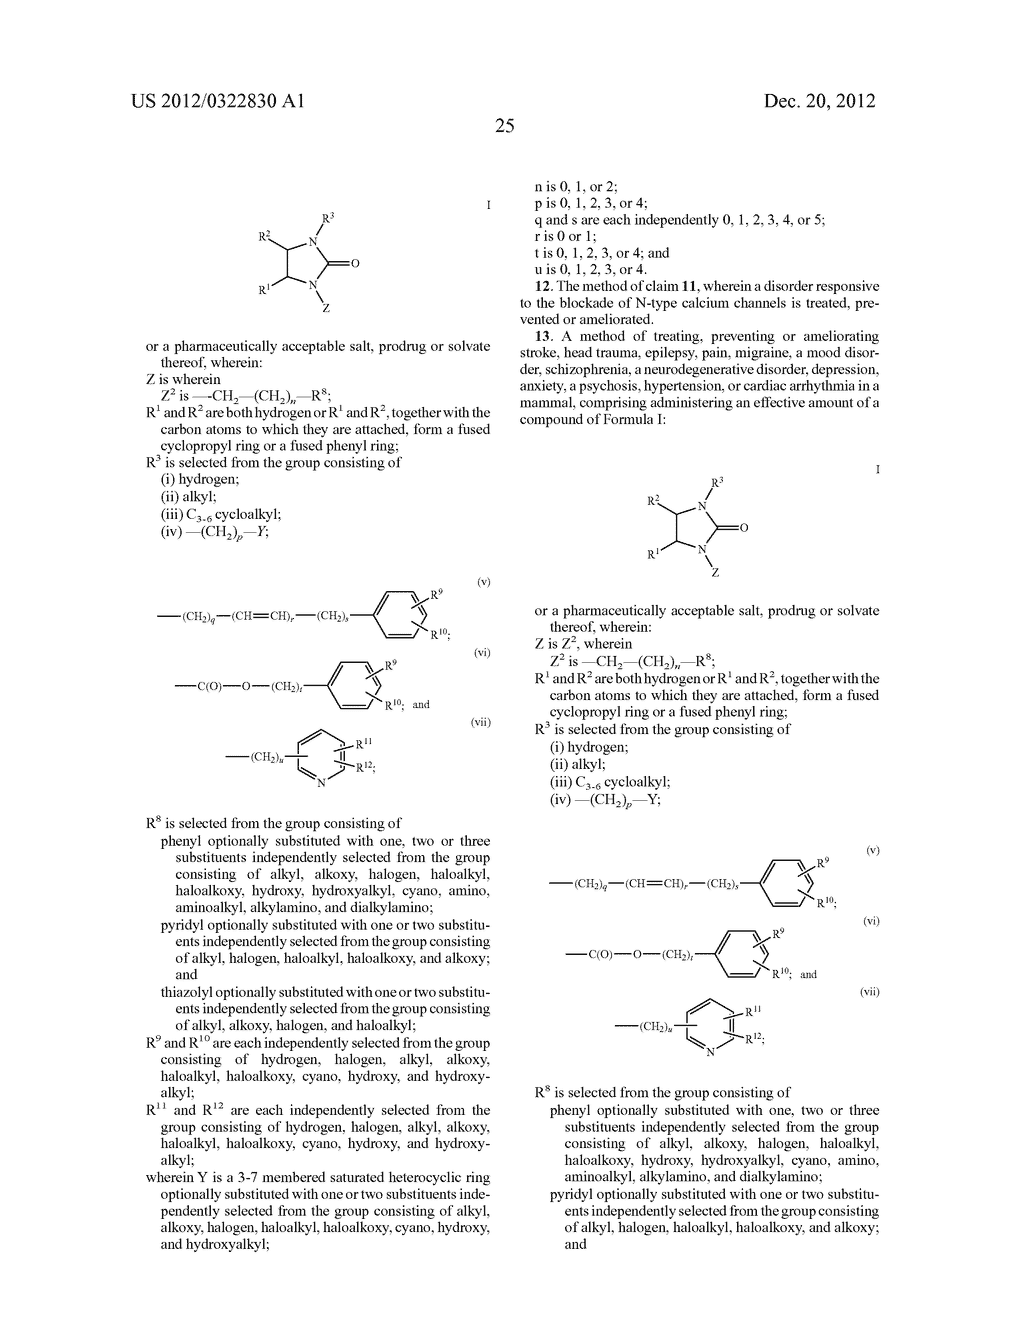 Cyclourea Compounds as Calcium Channel Blockers - diagram, schematic, and image 26